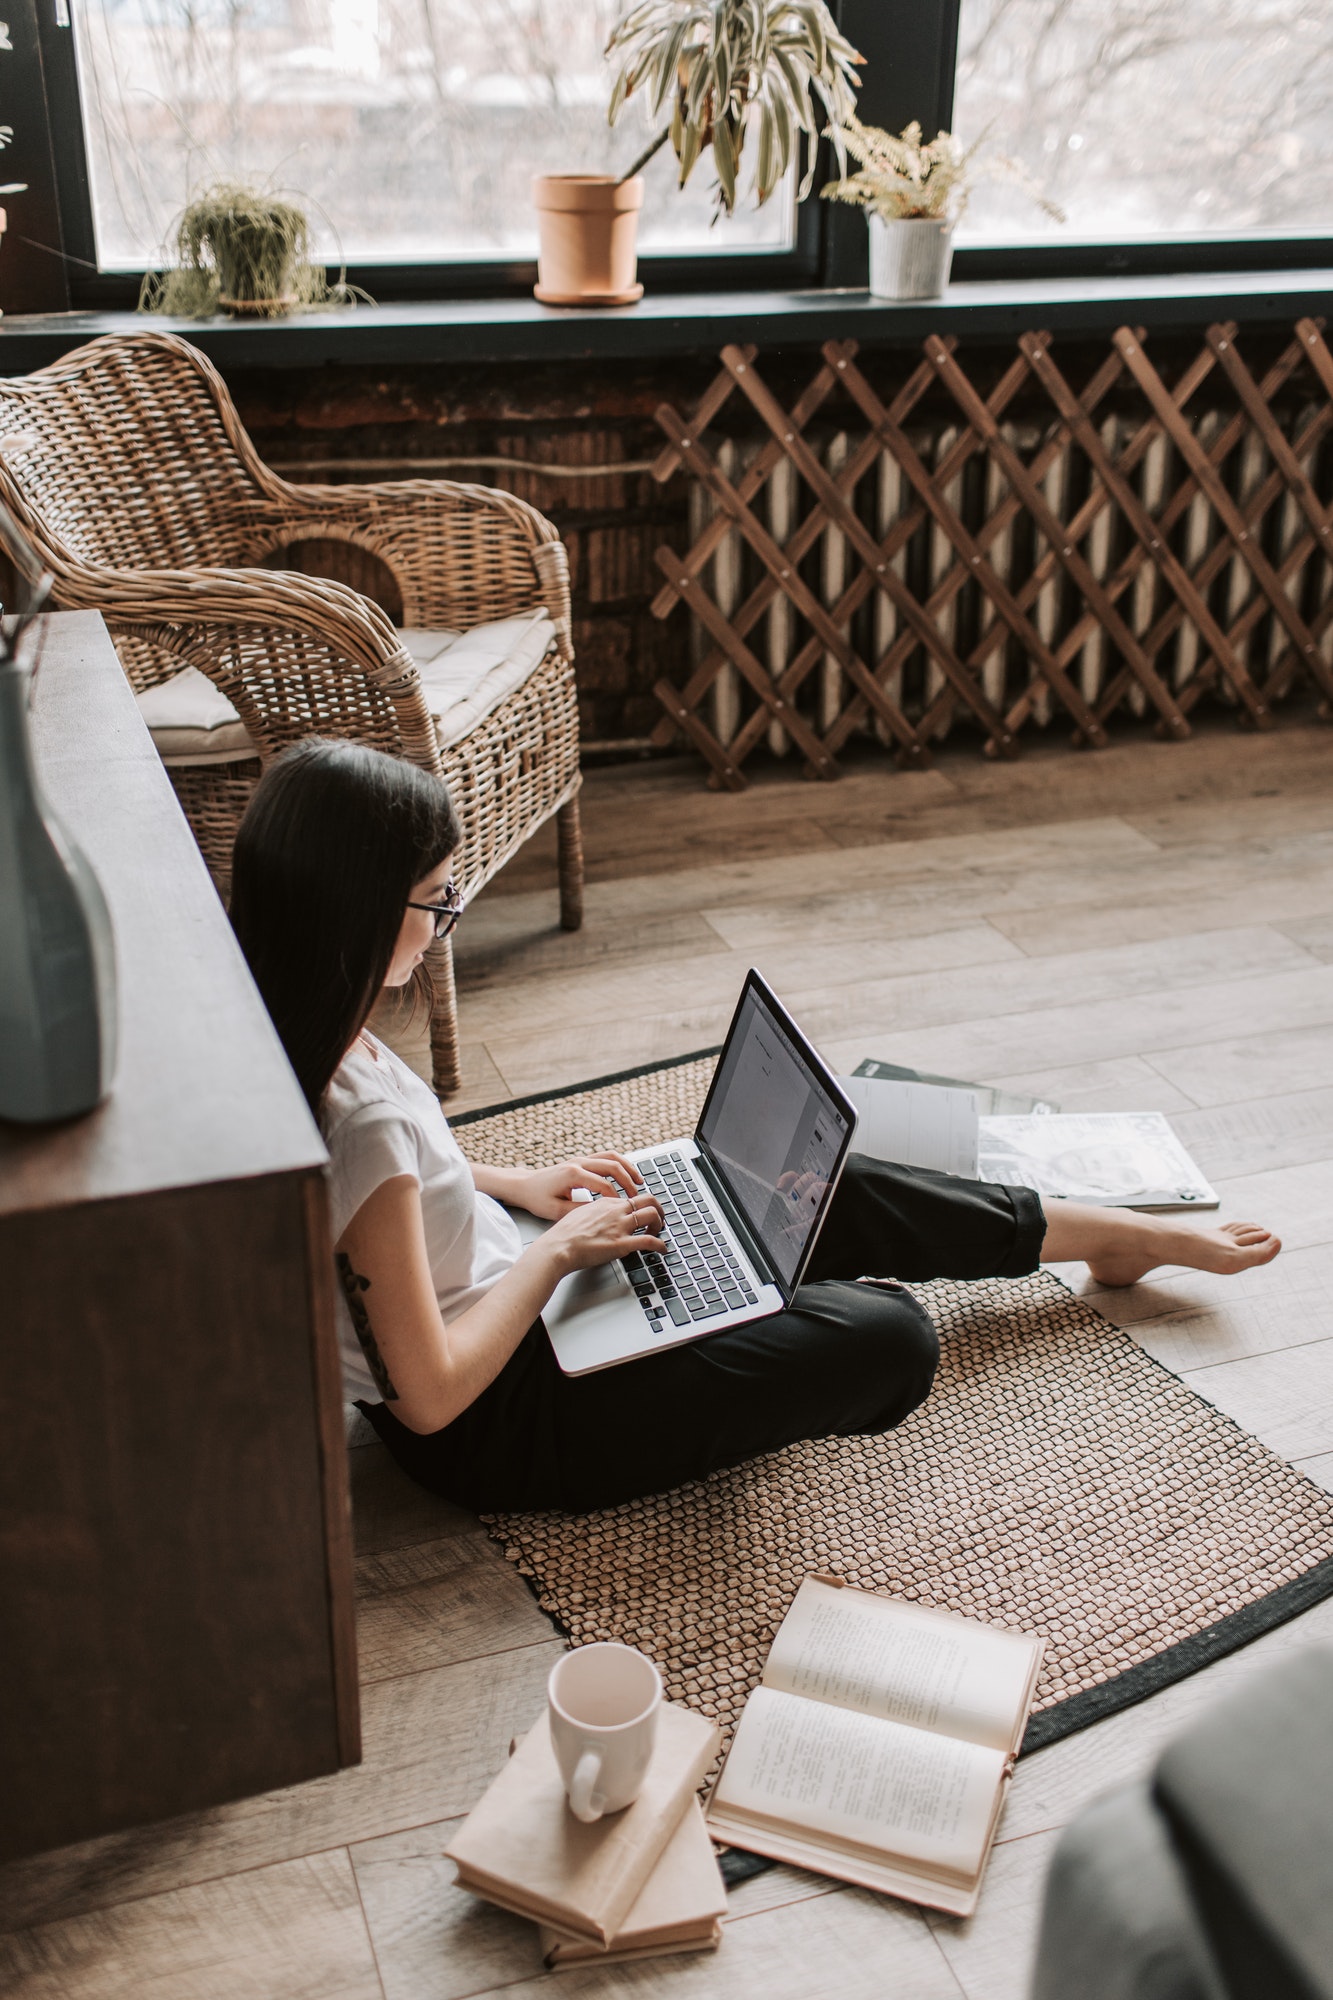 Young barefoot woman using laptop on floor near books in stylish living room